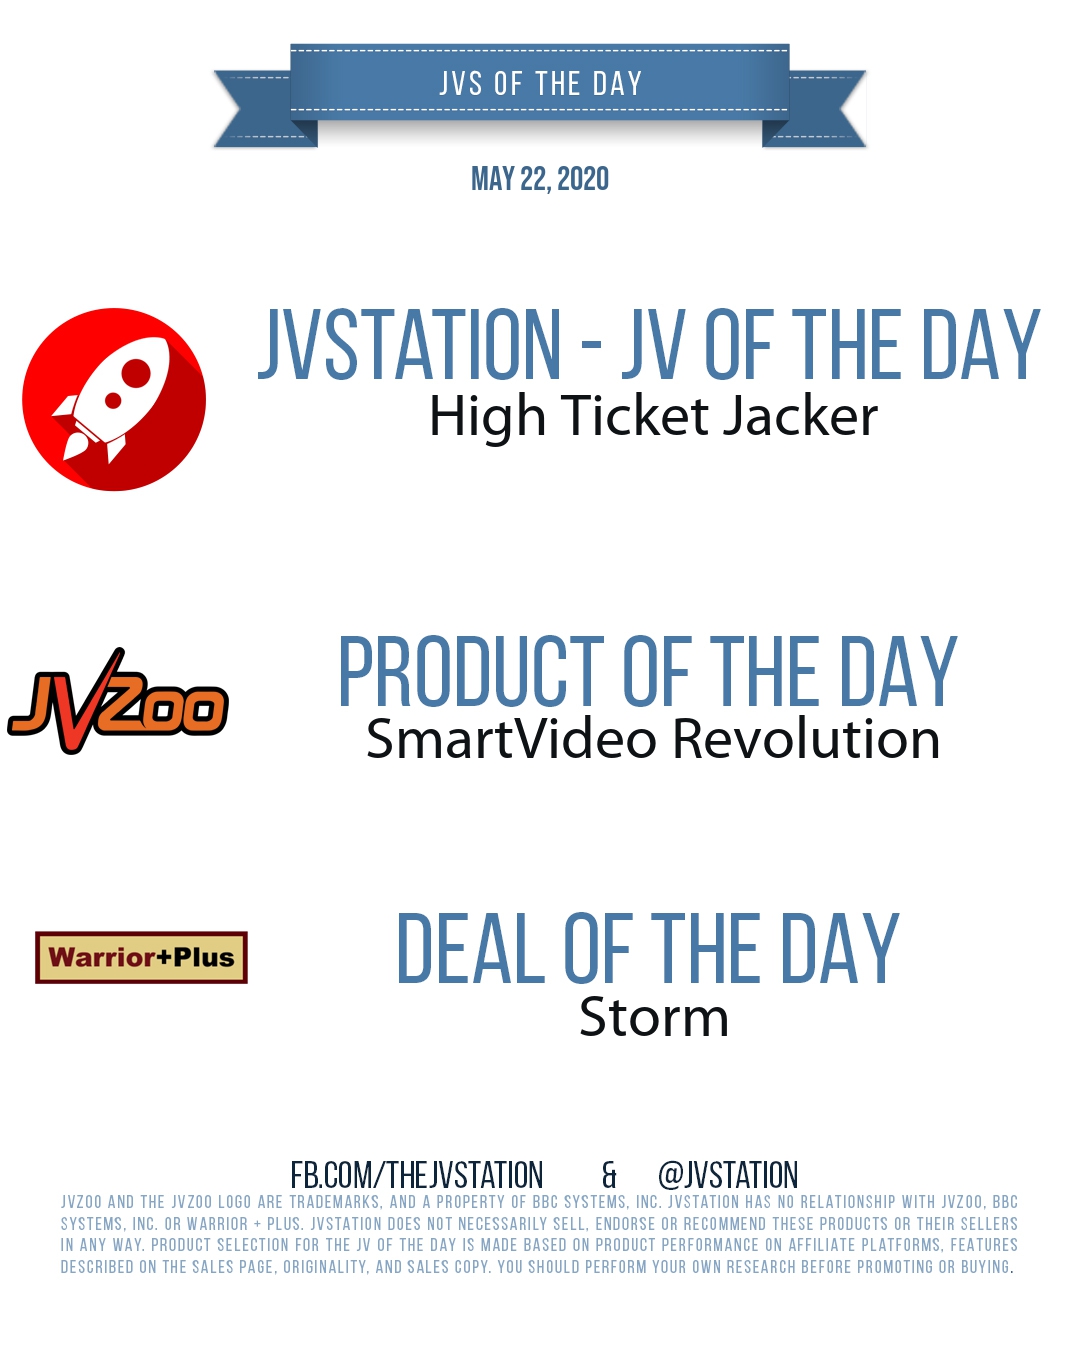 JVs of the day - May 22, 2020